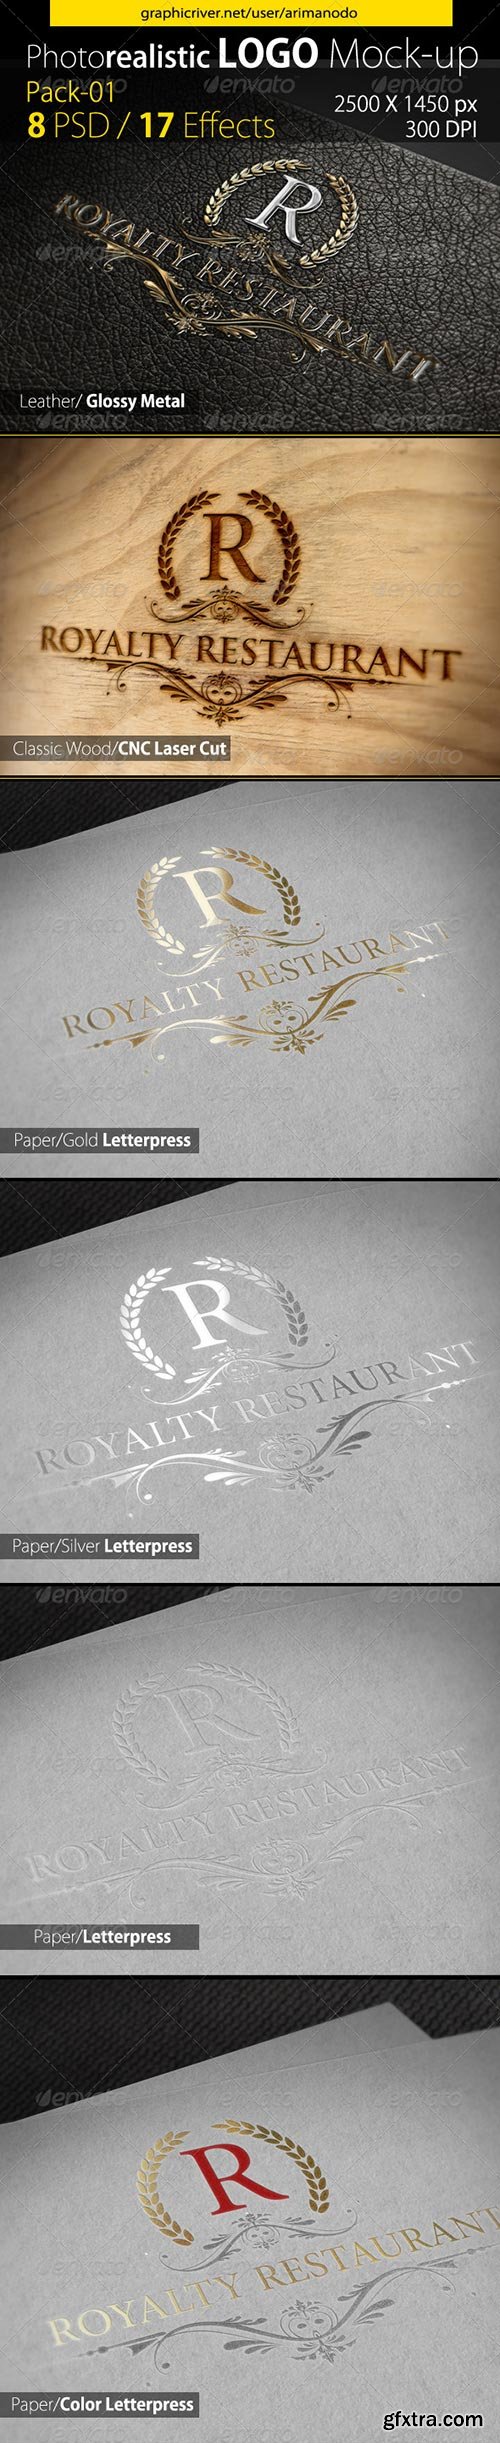 GraphicRiver - Photorealistic Logo Mock-Up Pack 01